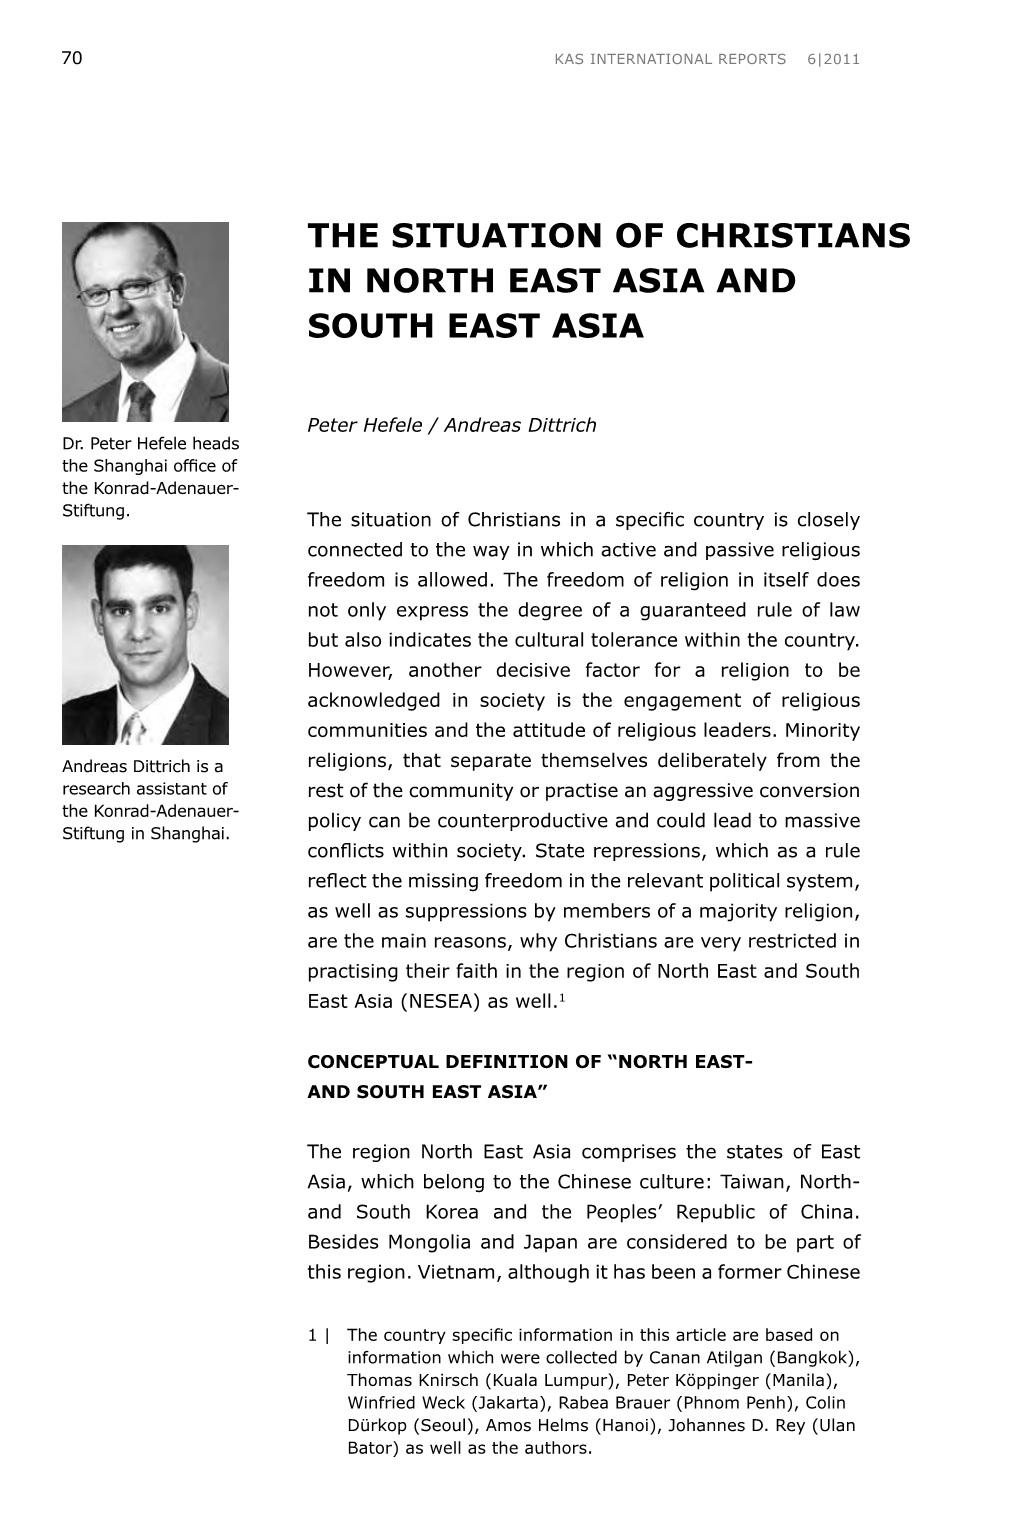 The Situation of Christians in North East Asia and South East Asia